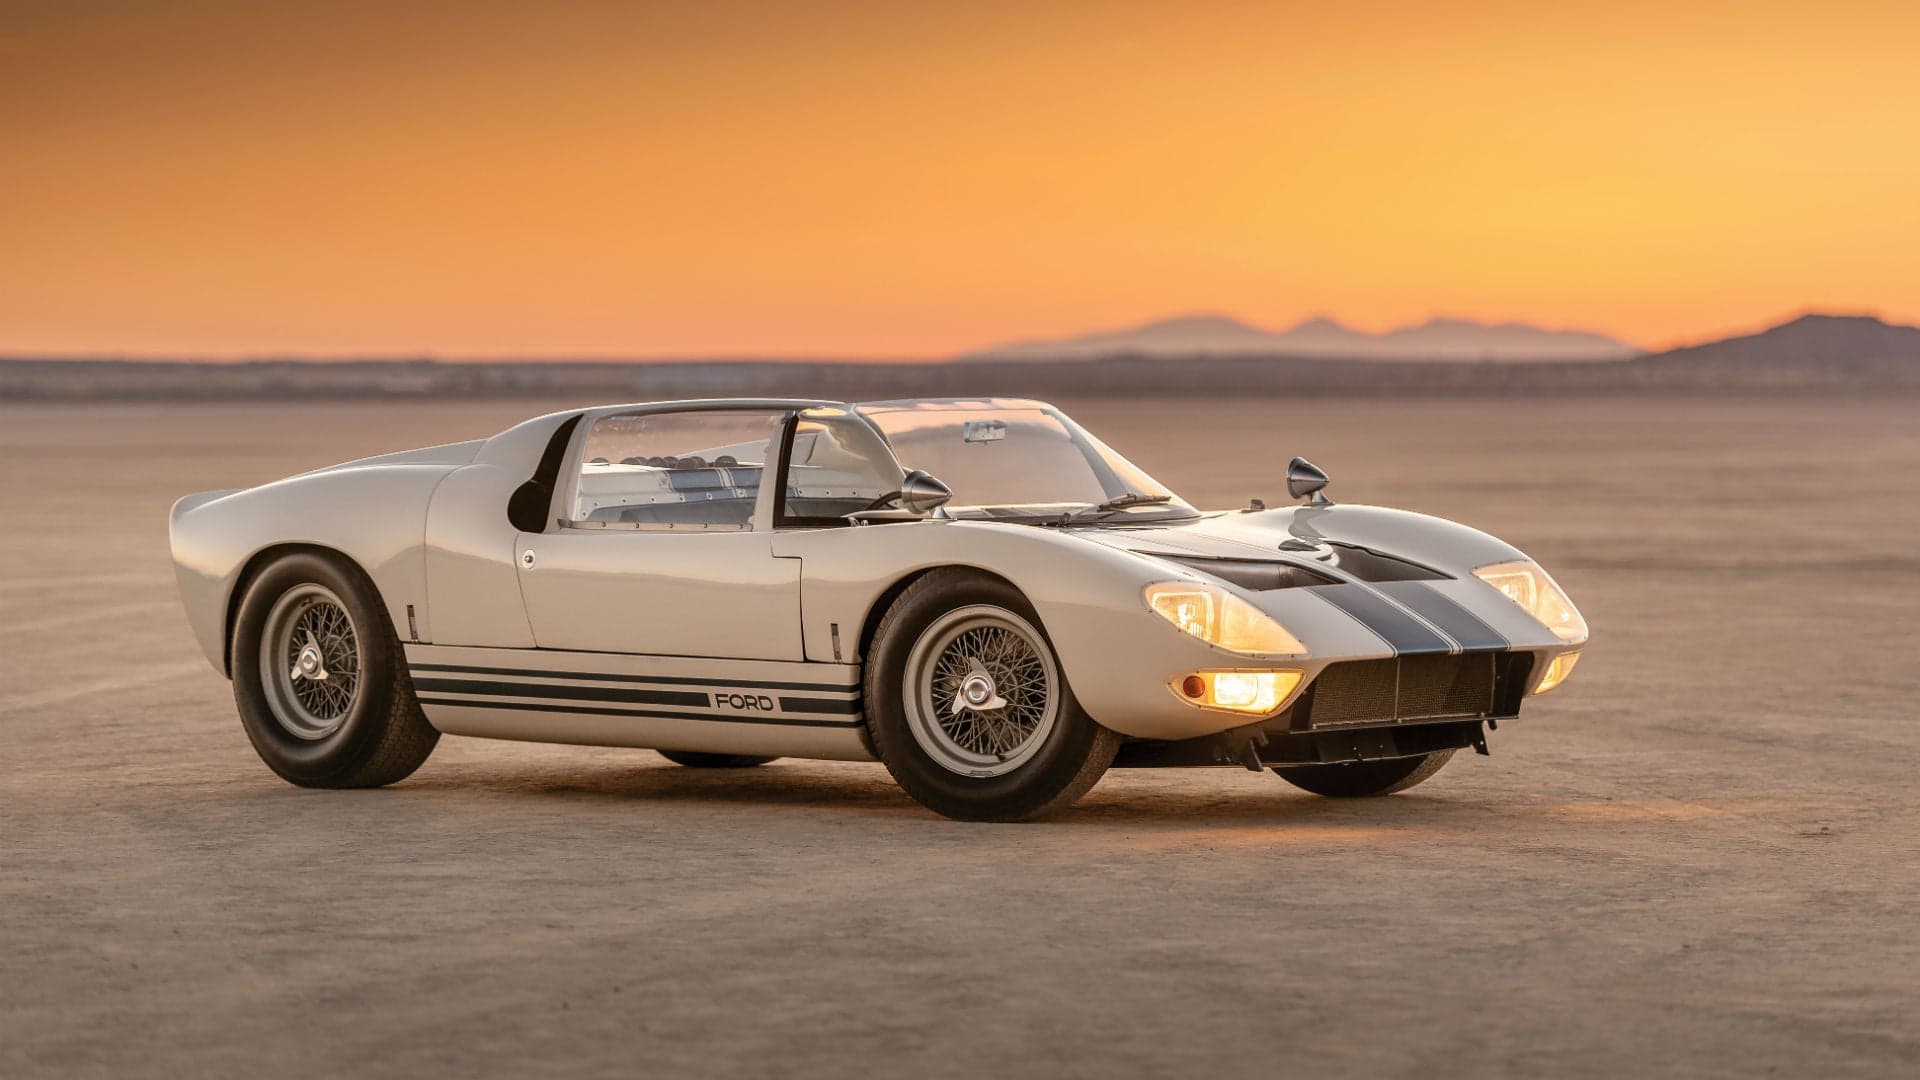 Pristine, 1-of-5 Ford GT40 Roadster Prototype Expected to Fetch $9 Million at Auction